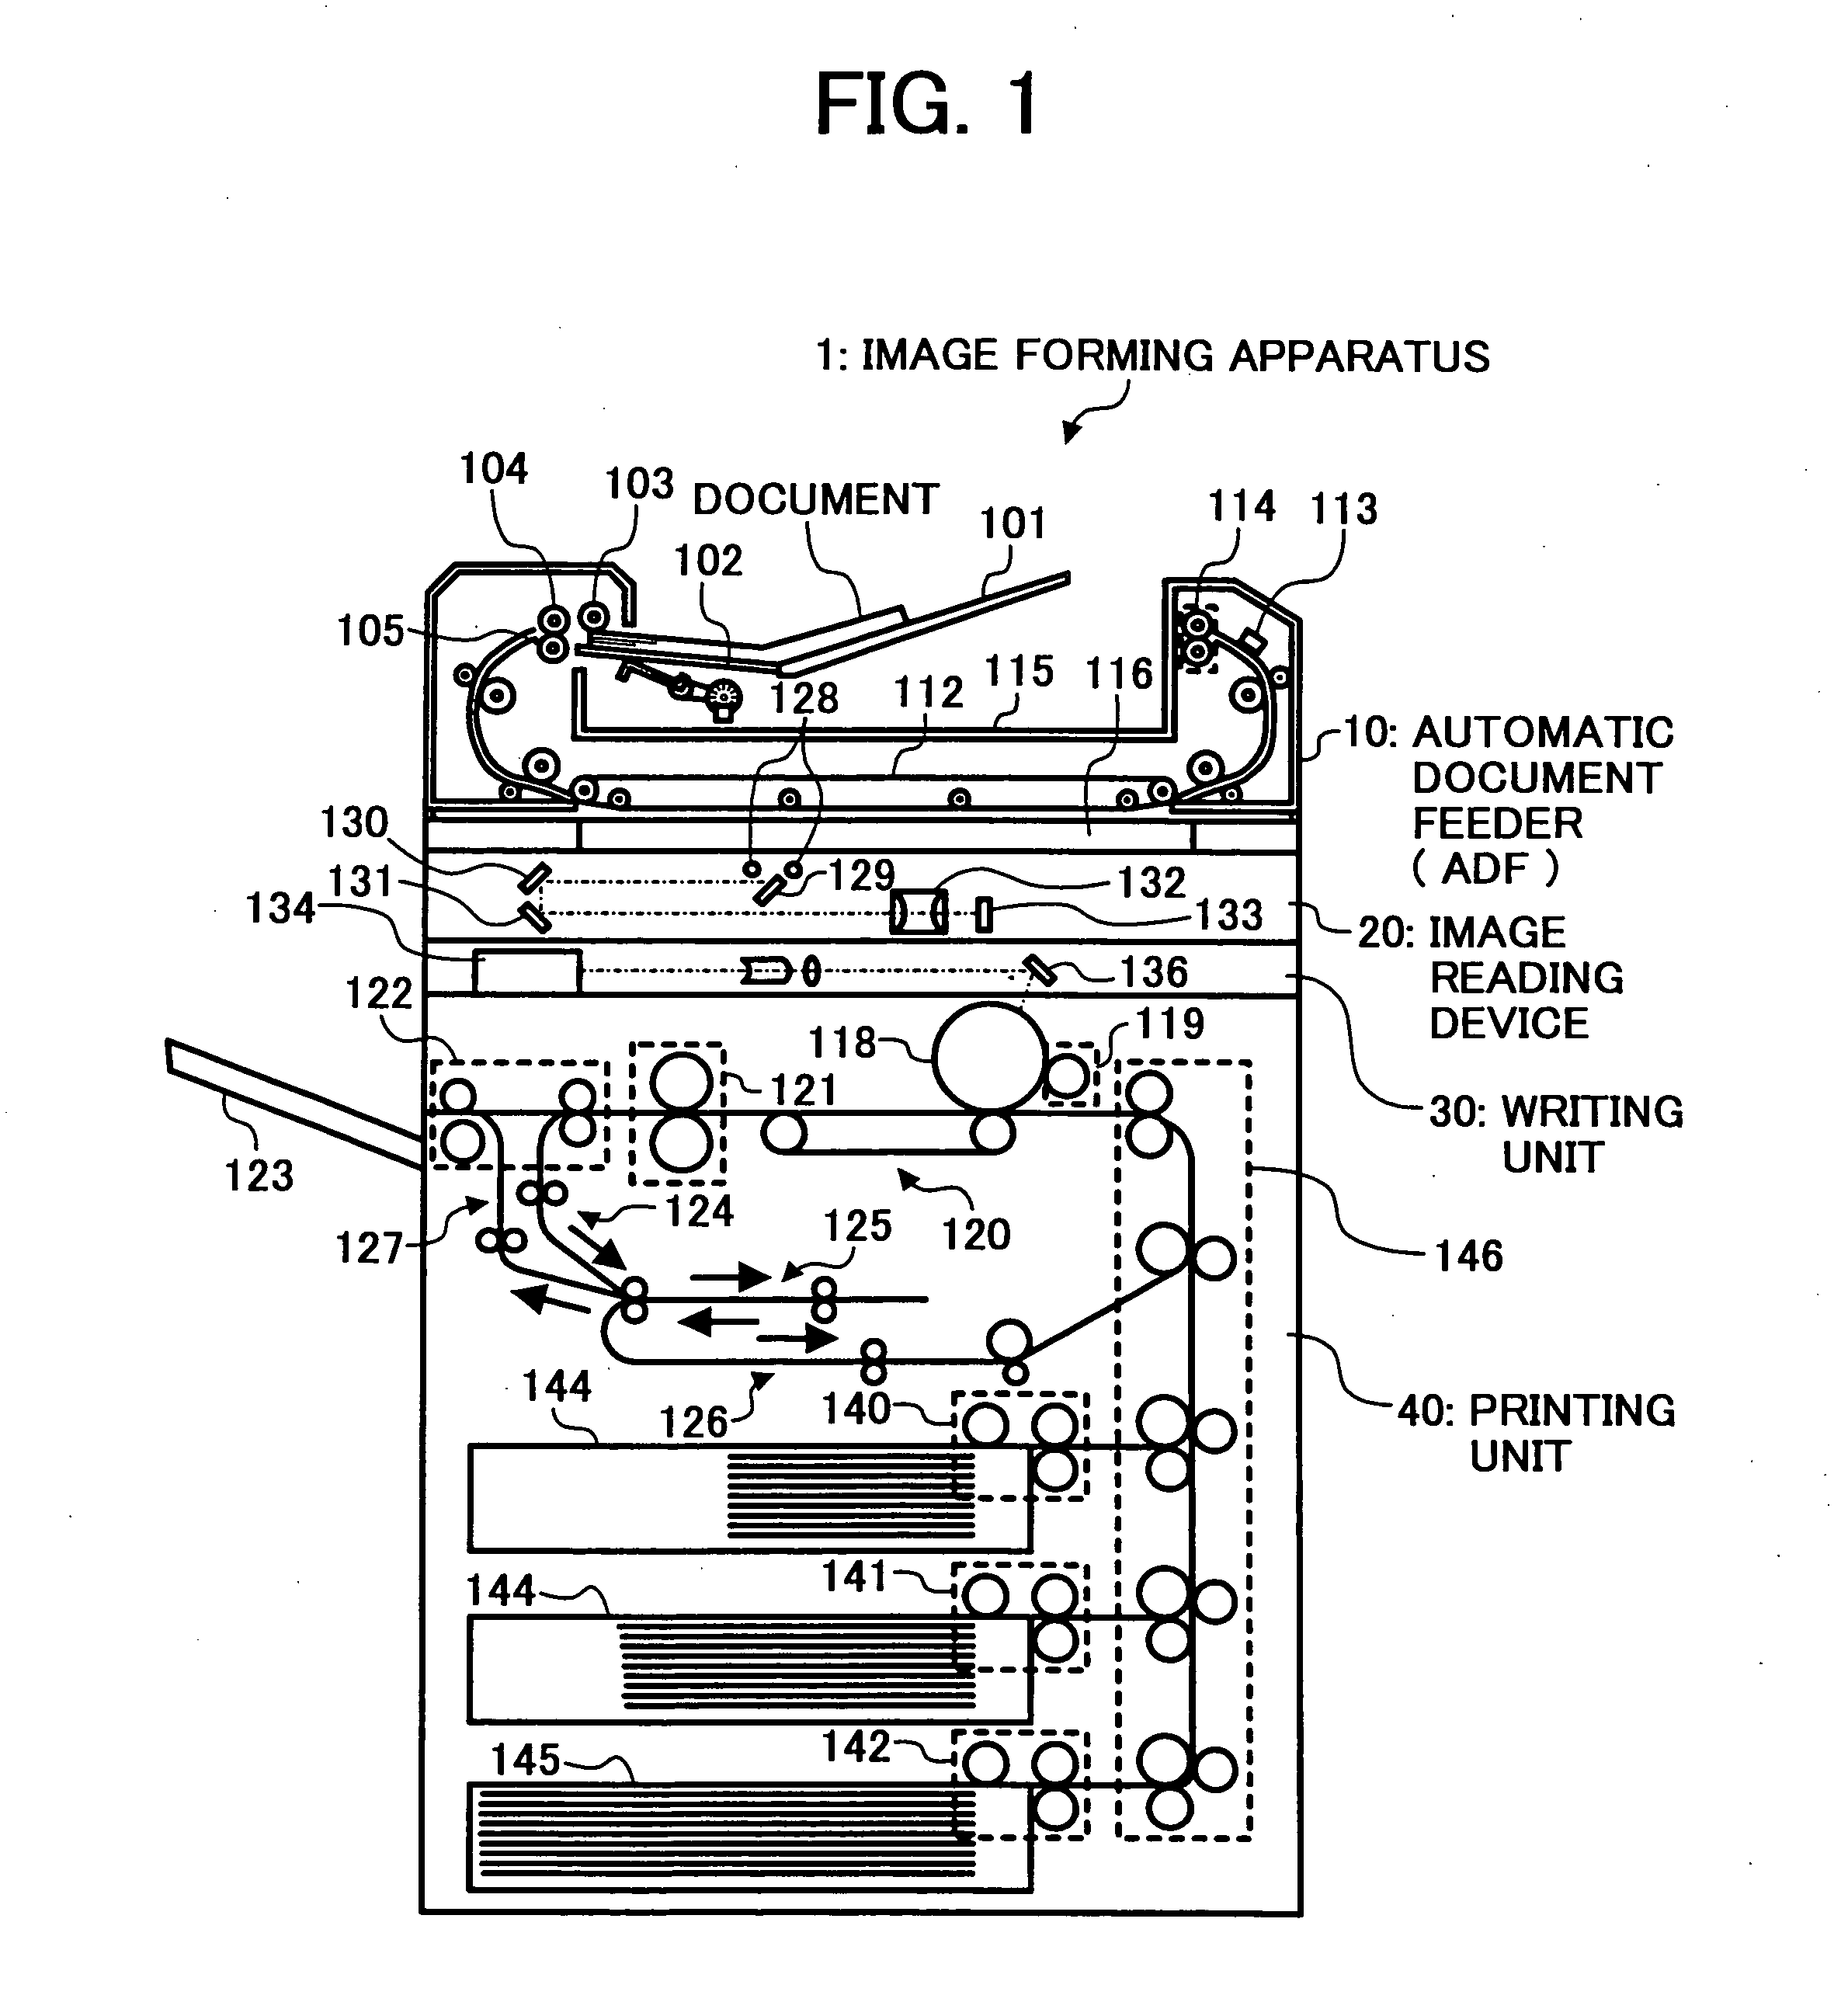 Image forming apparatus, image forming method, and fixing unit